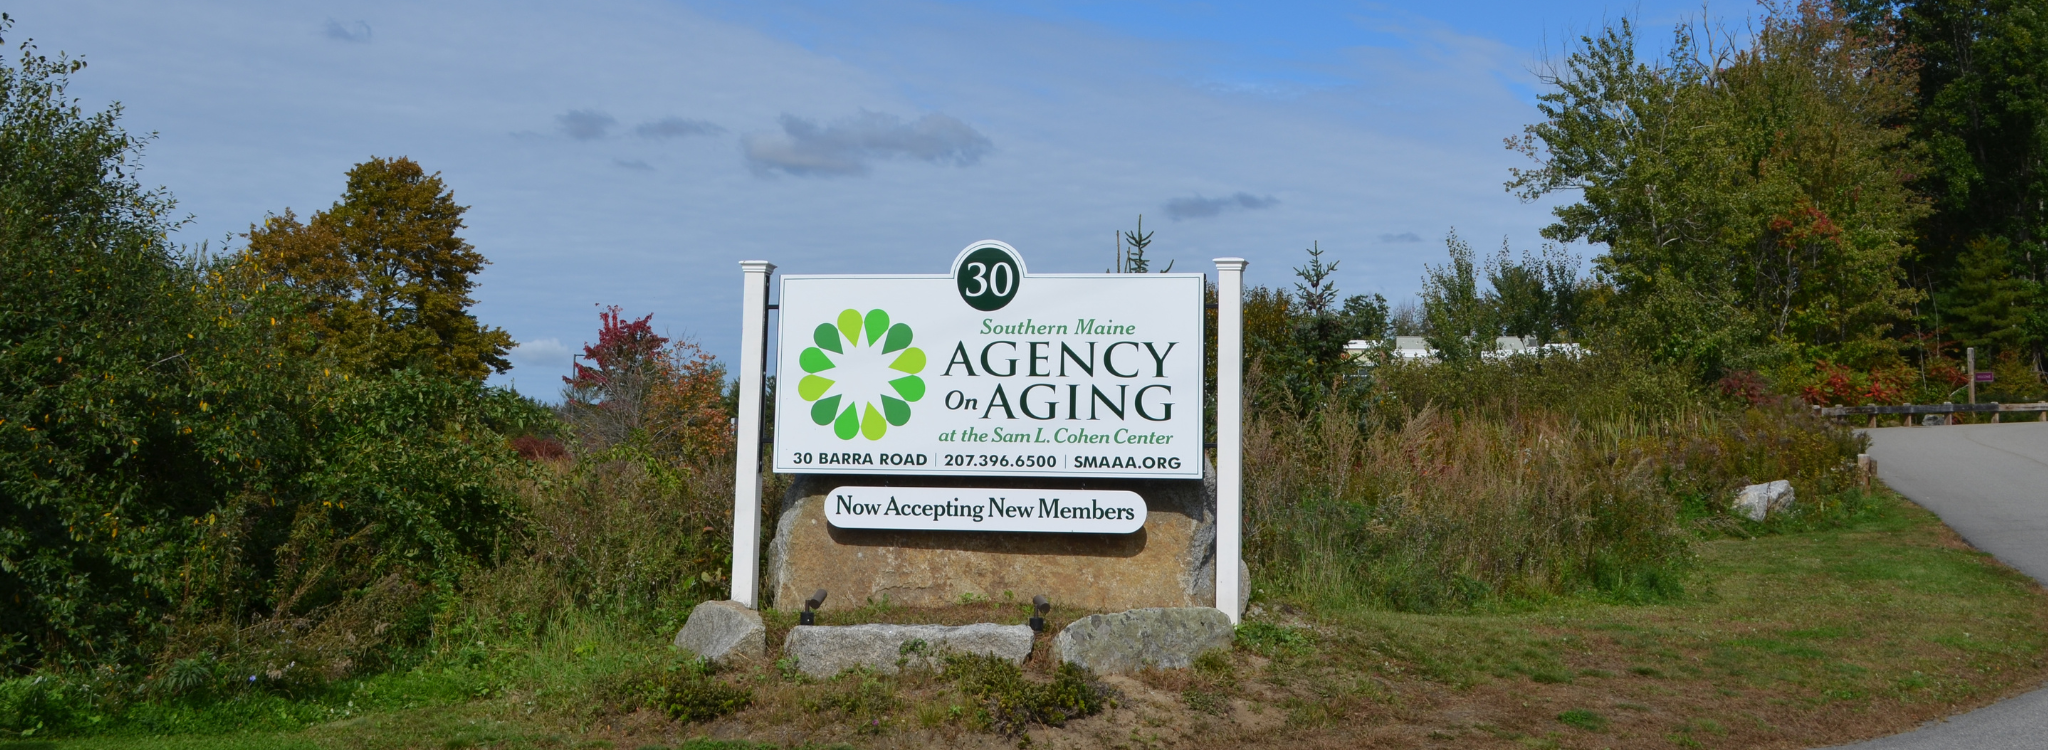 banner image with the address of the Southern Maine Agency on Aging as it appears at the entrance of the building